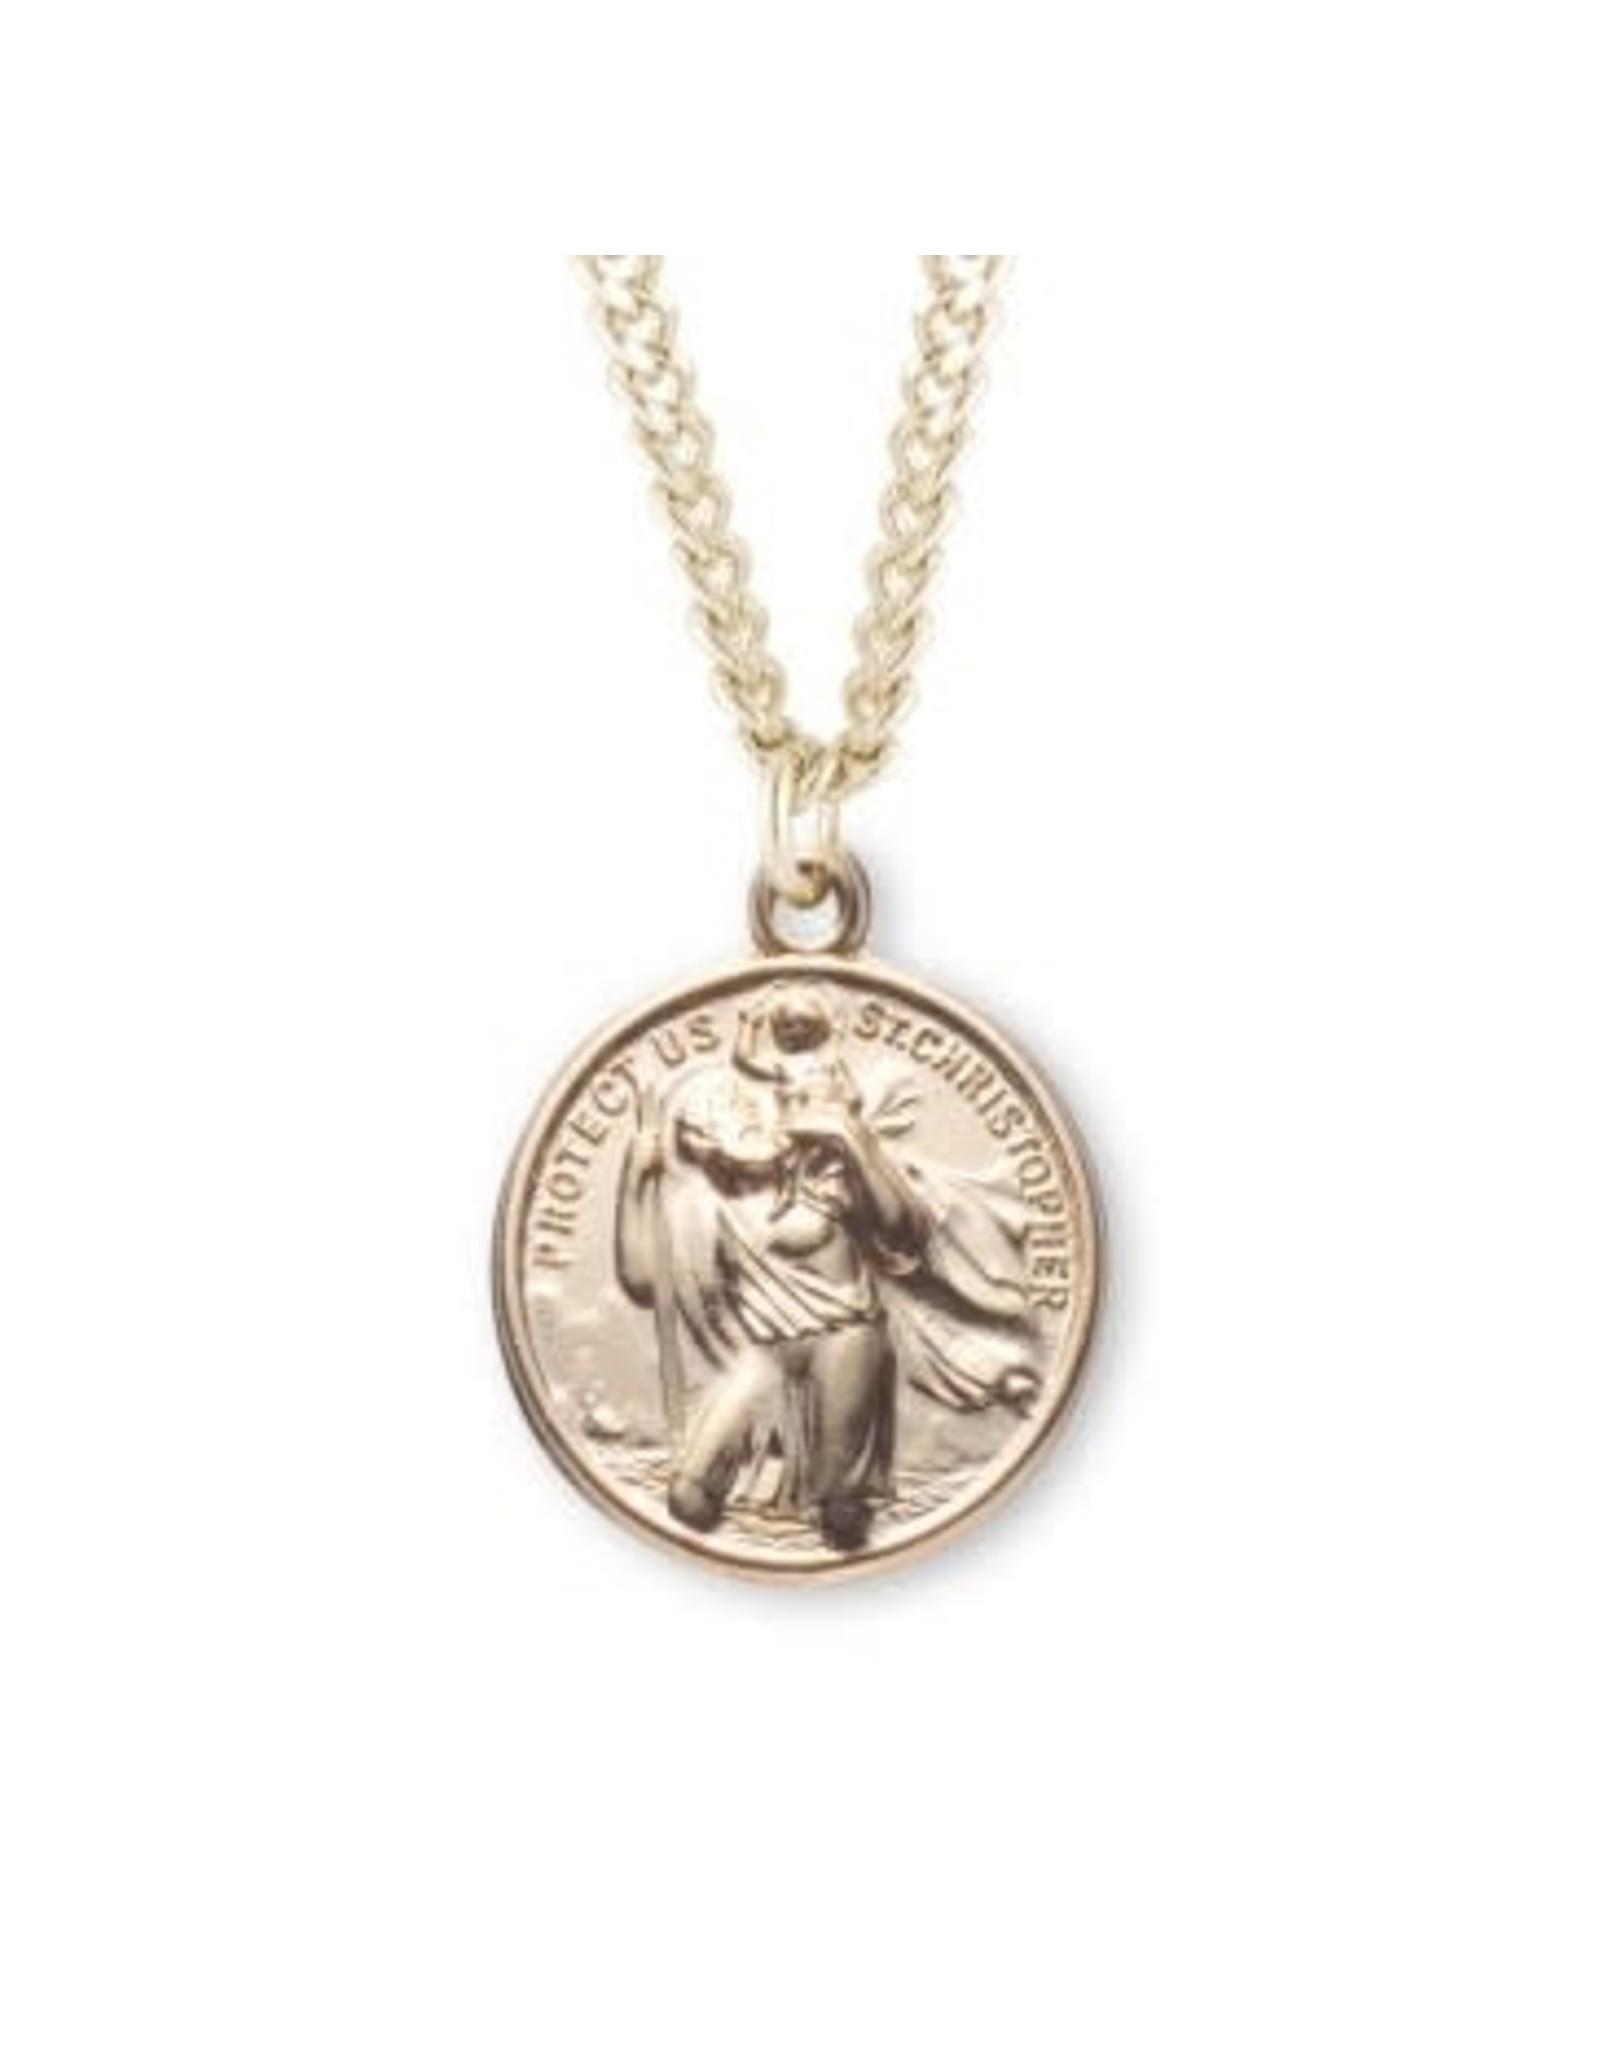 HMH St. Christopher Medal - Gold over Sterling Silver on 24" Chain